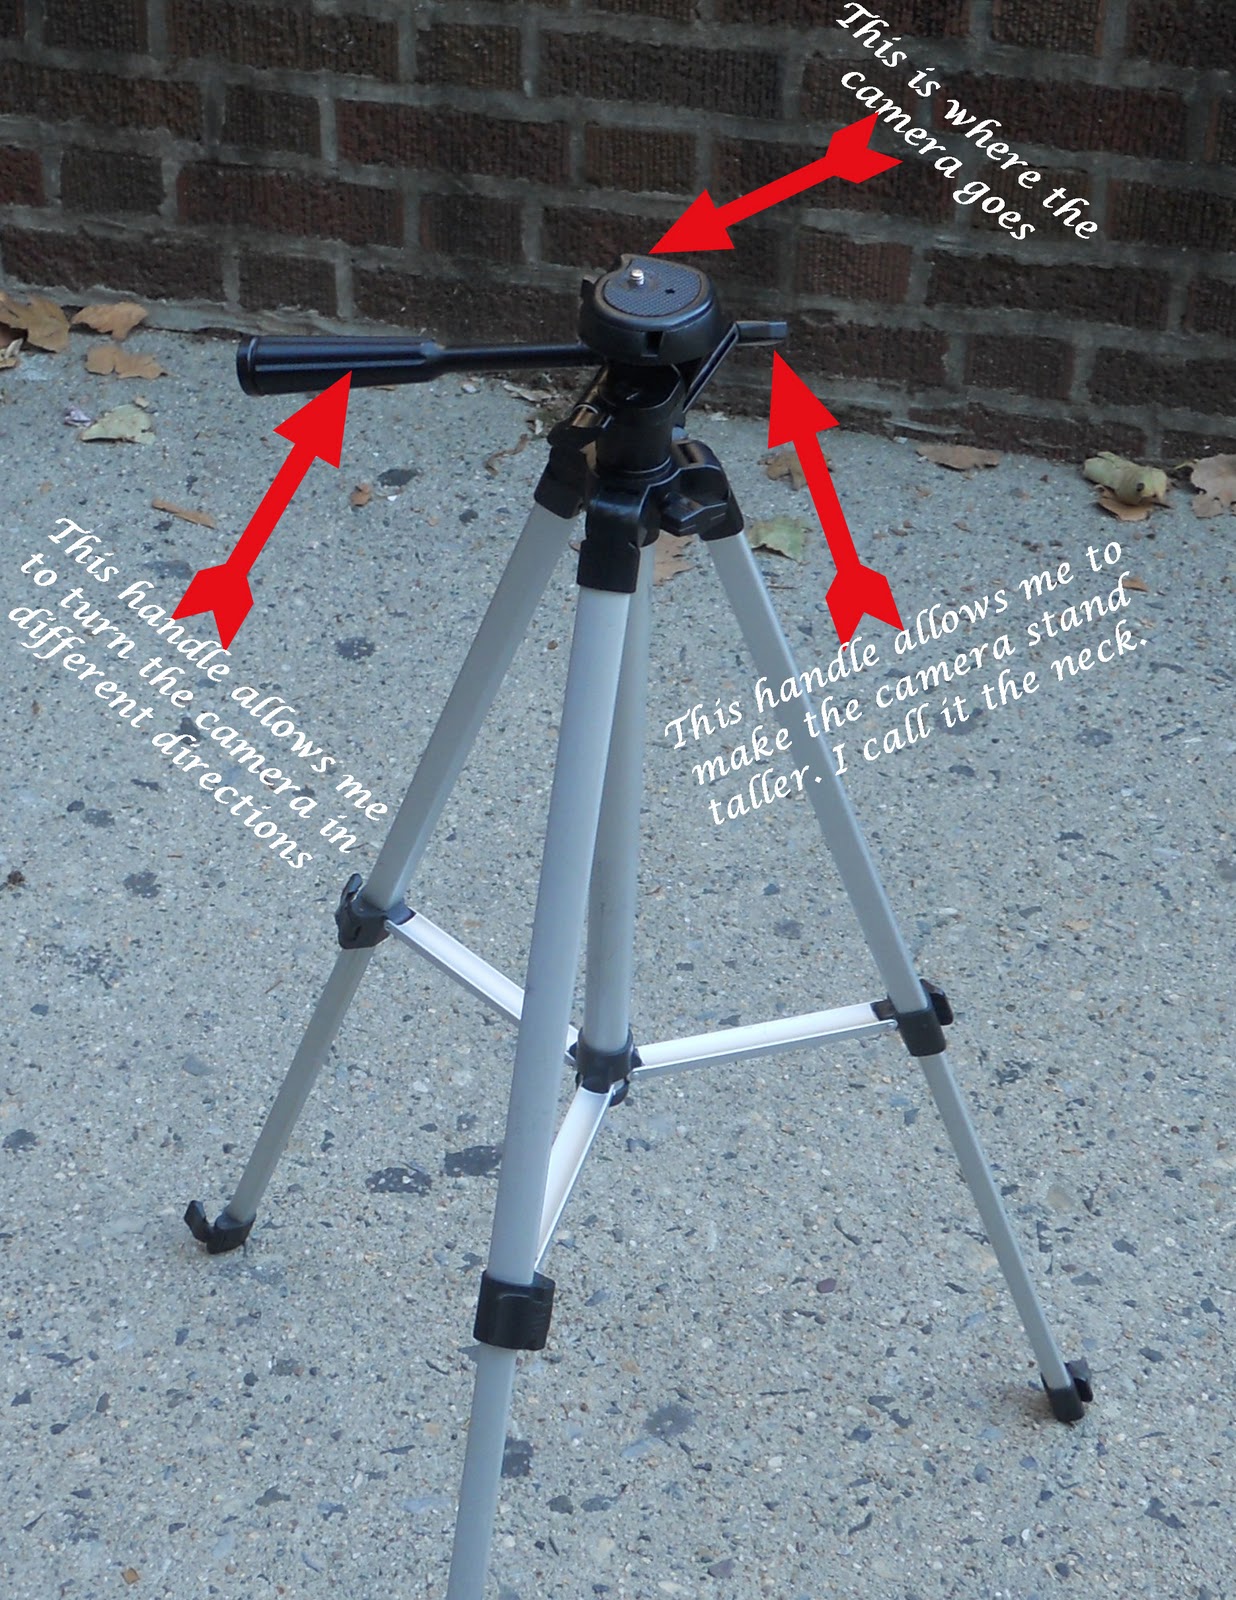 How to use the tripod